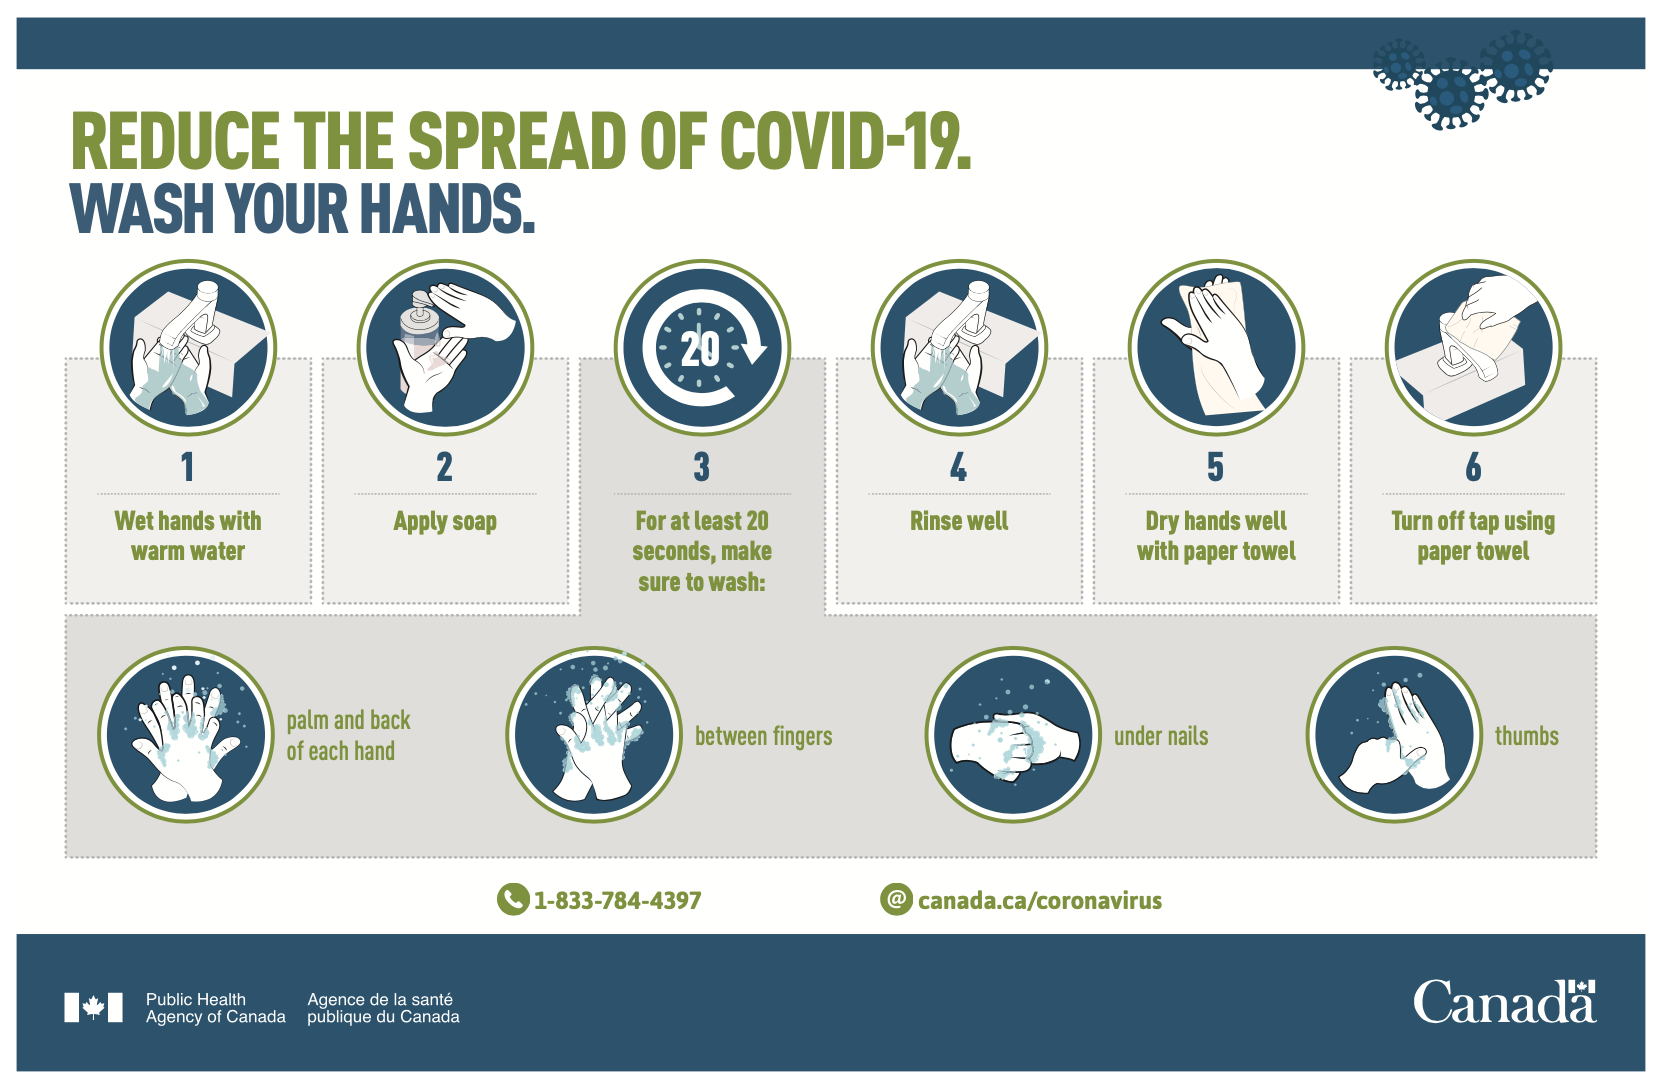 Reduce the spread of COVID-19 infographic